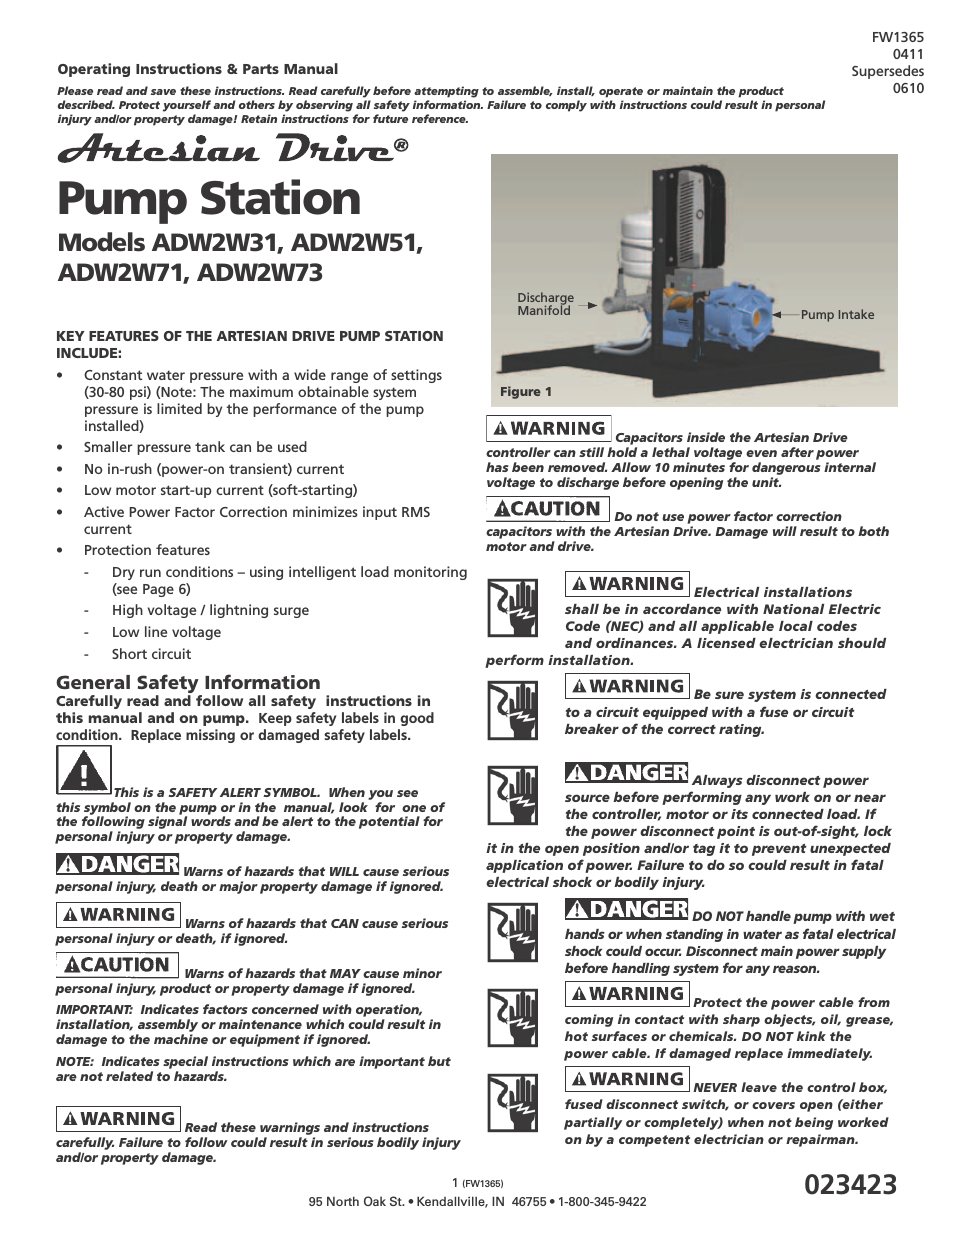 Constant Pressure Pumping Stations - ADW2W31